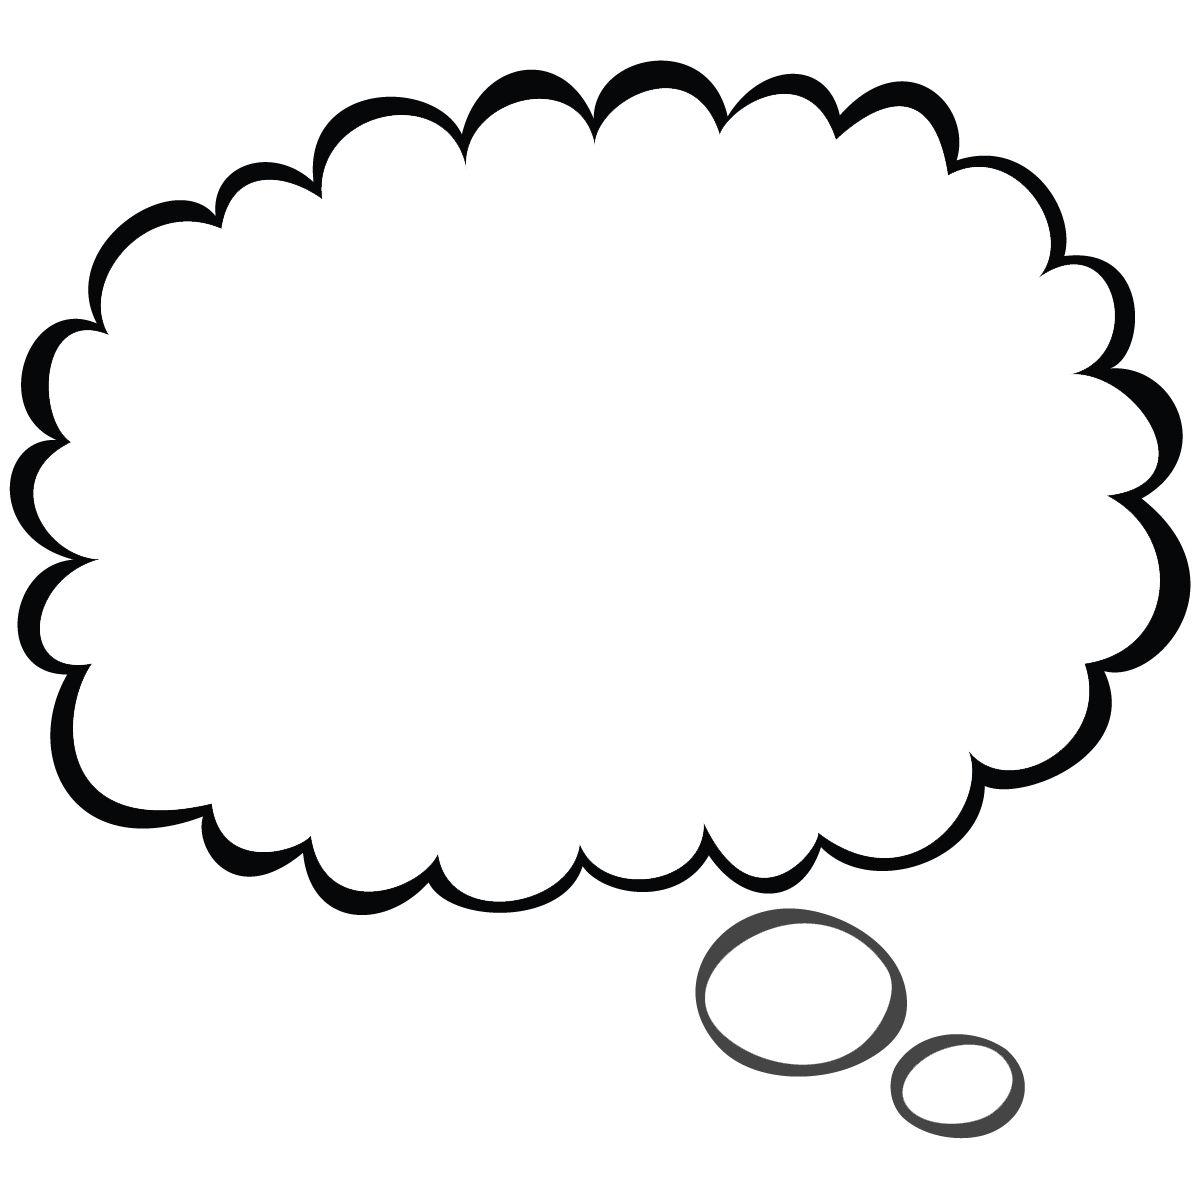 Thought Bubble transparent PNG - StickPNG